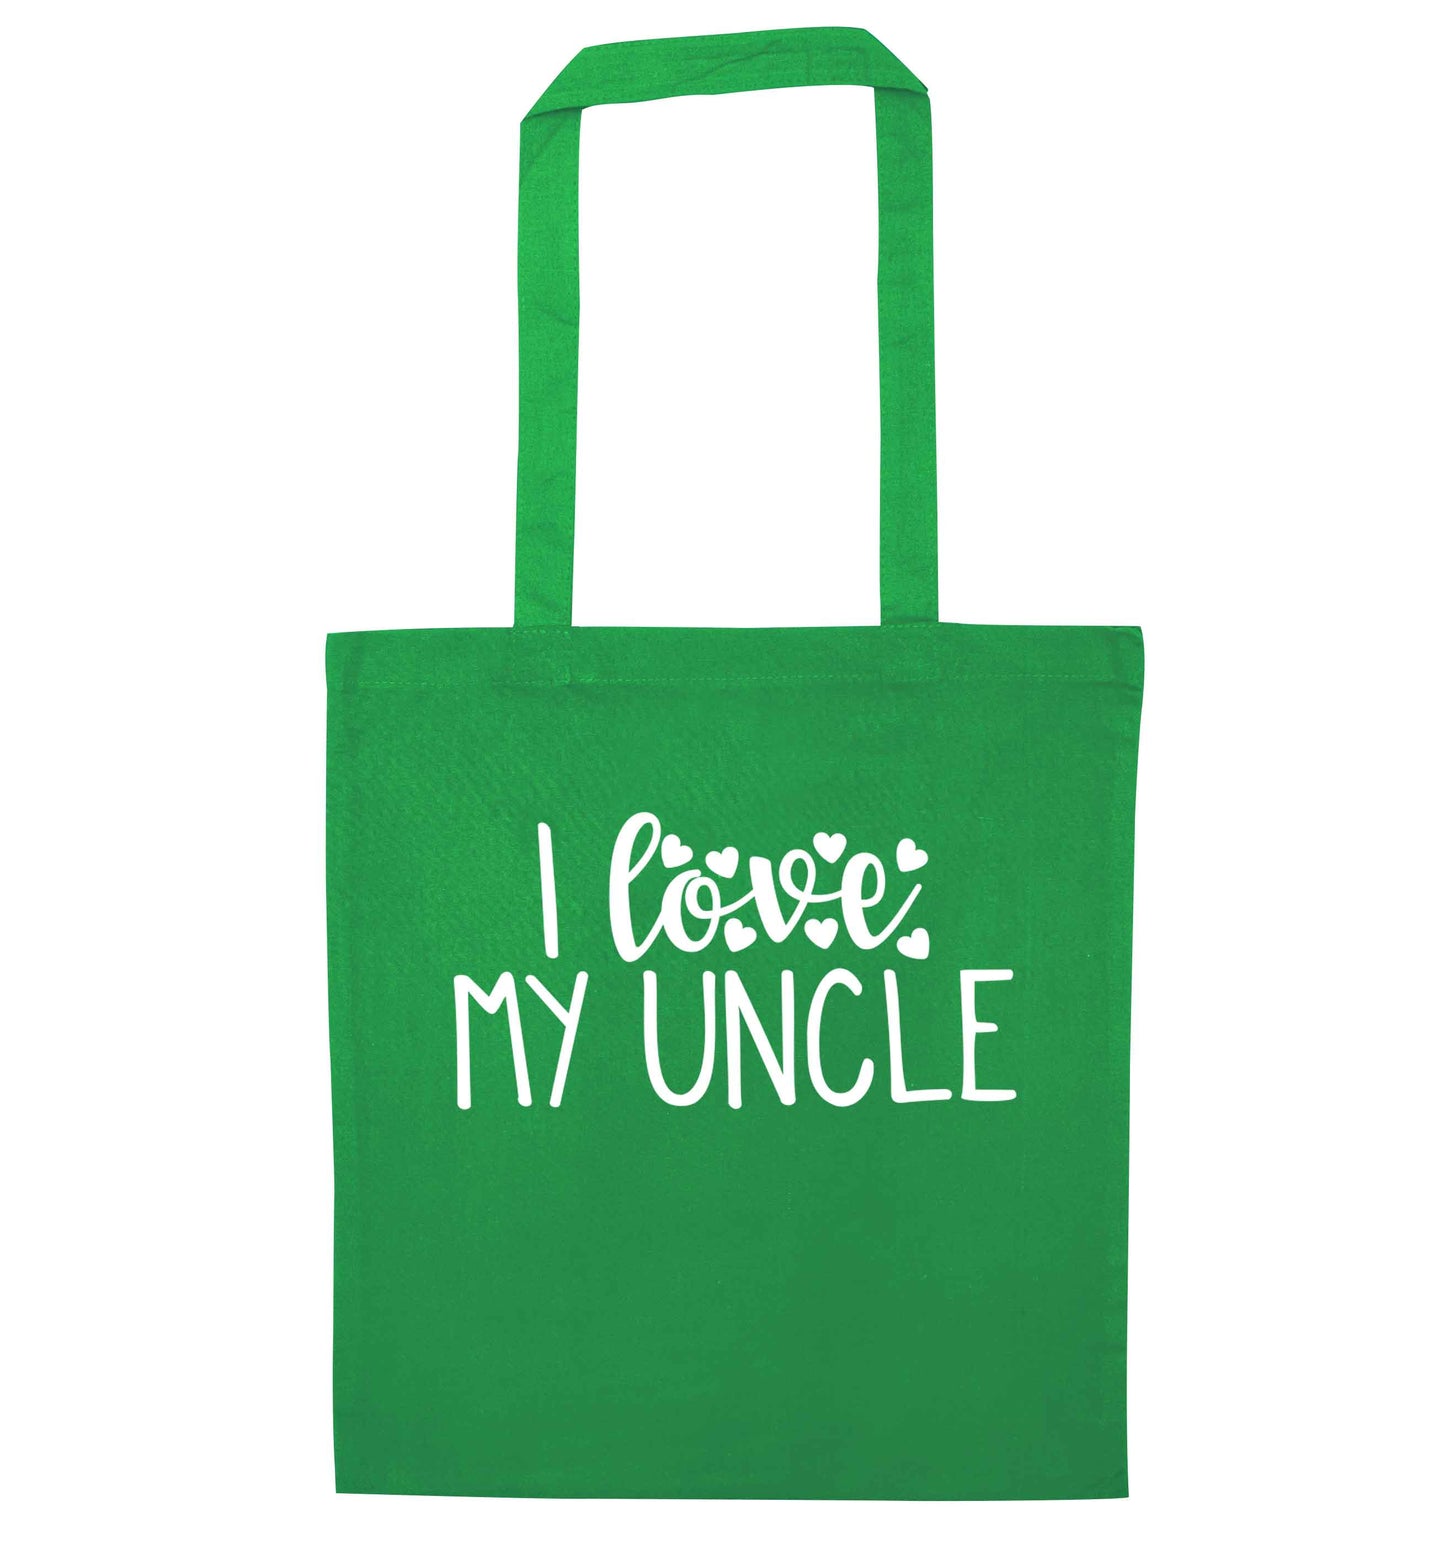 I love my uncle green tote bag